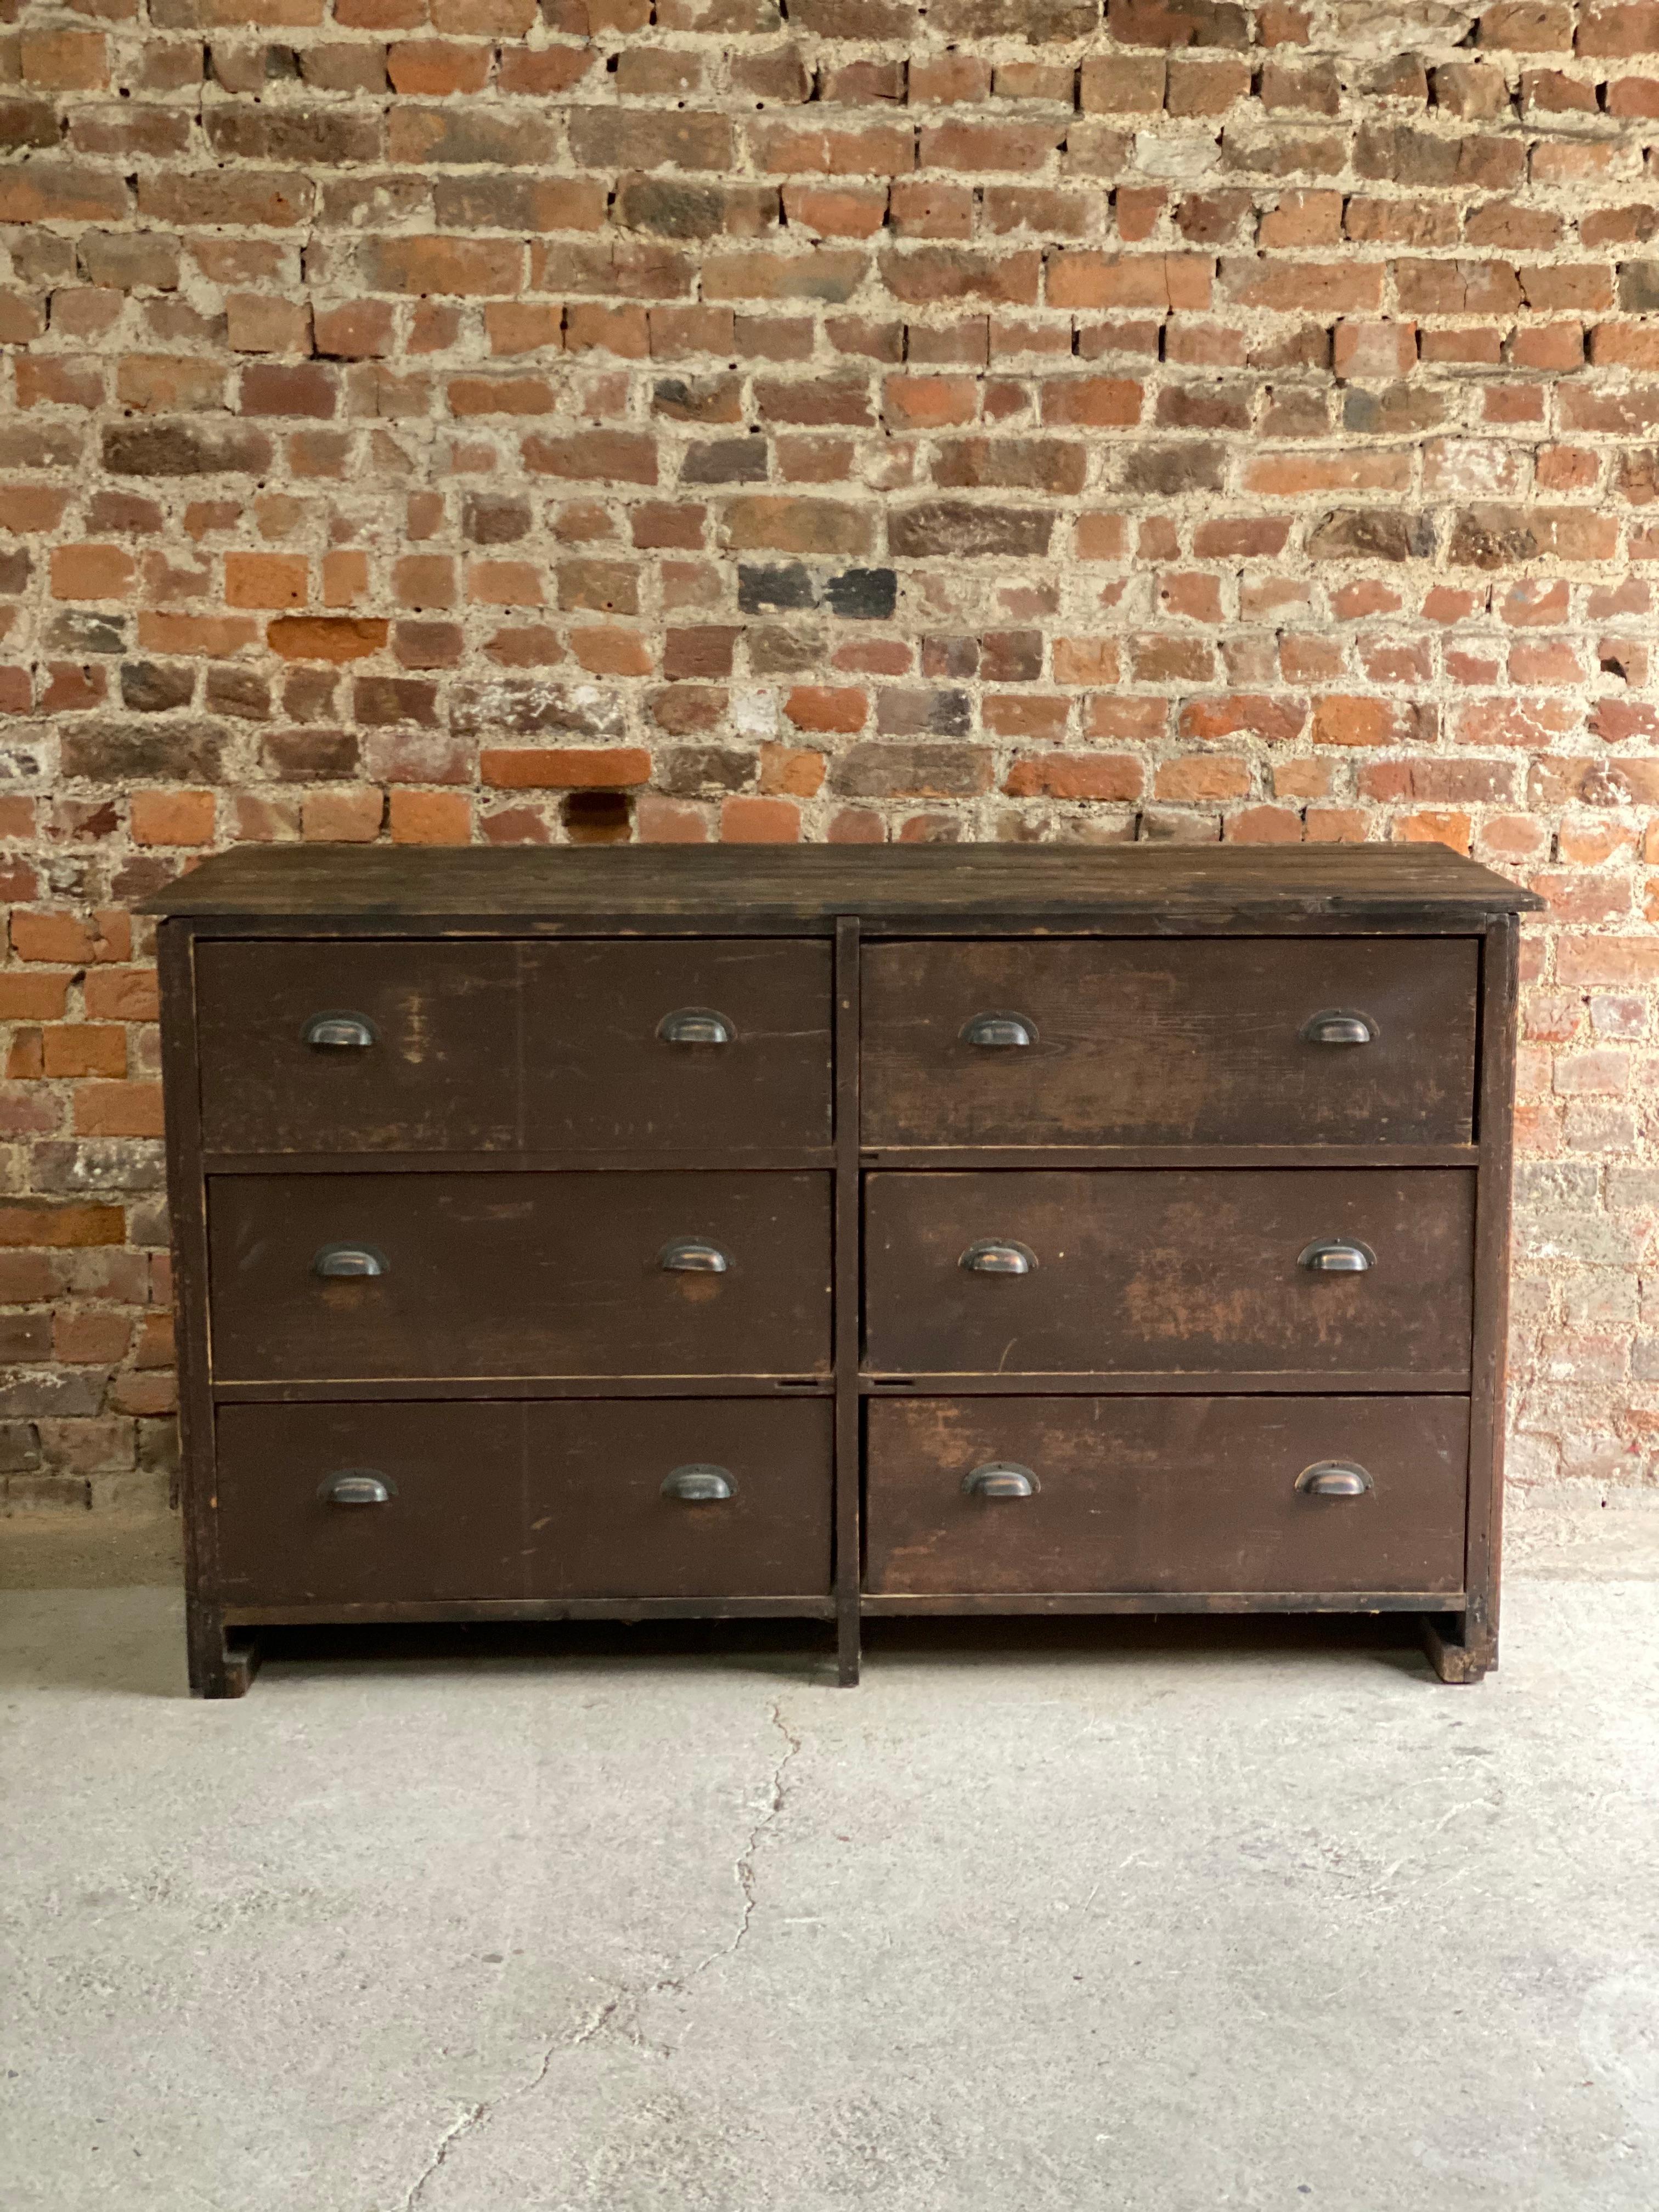 Large industrial haberdashery pine bank of drawers circa 1890, the rectangular tongue and groove top over six large pullout drawers with original copper cup handles, original rustic appearance with great patina, perfect for that loft space or